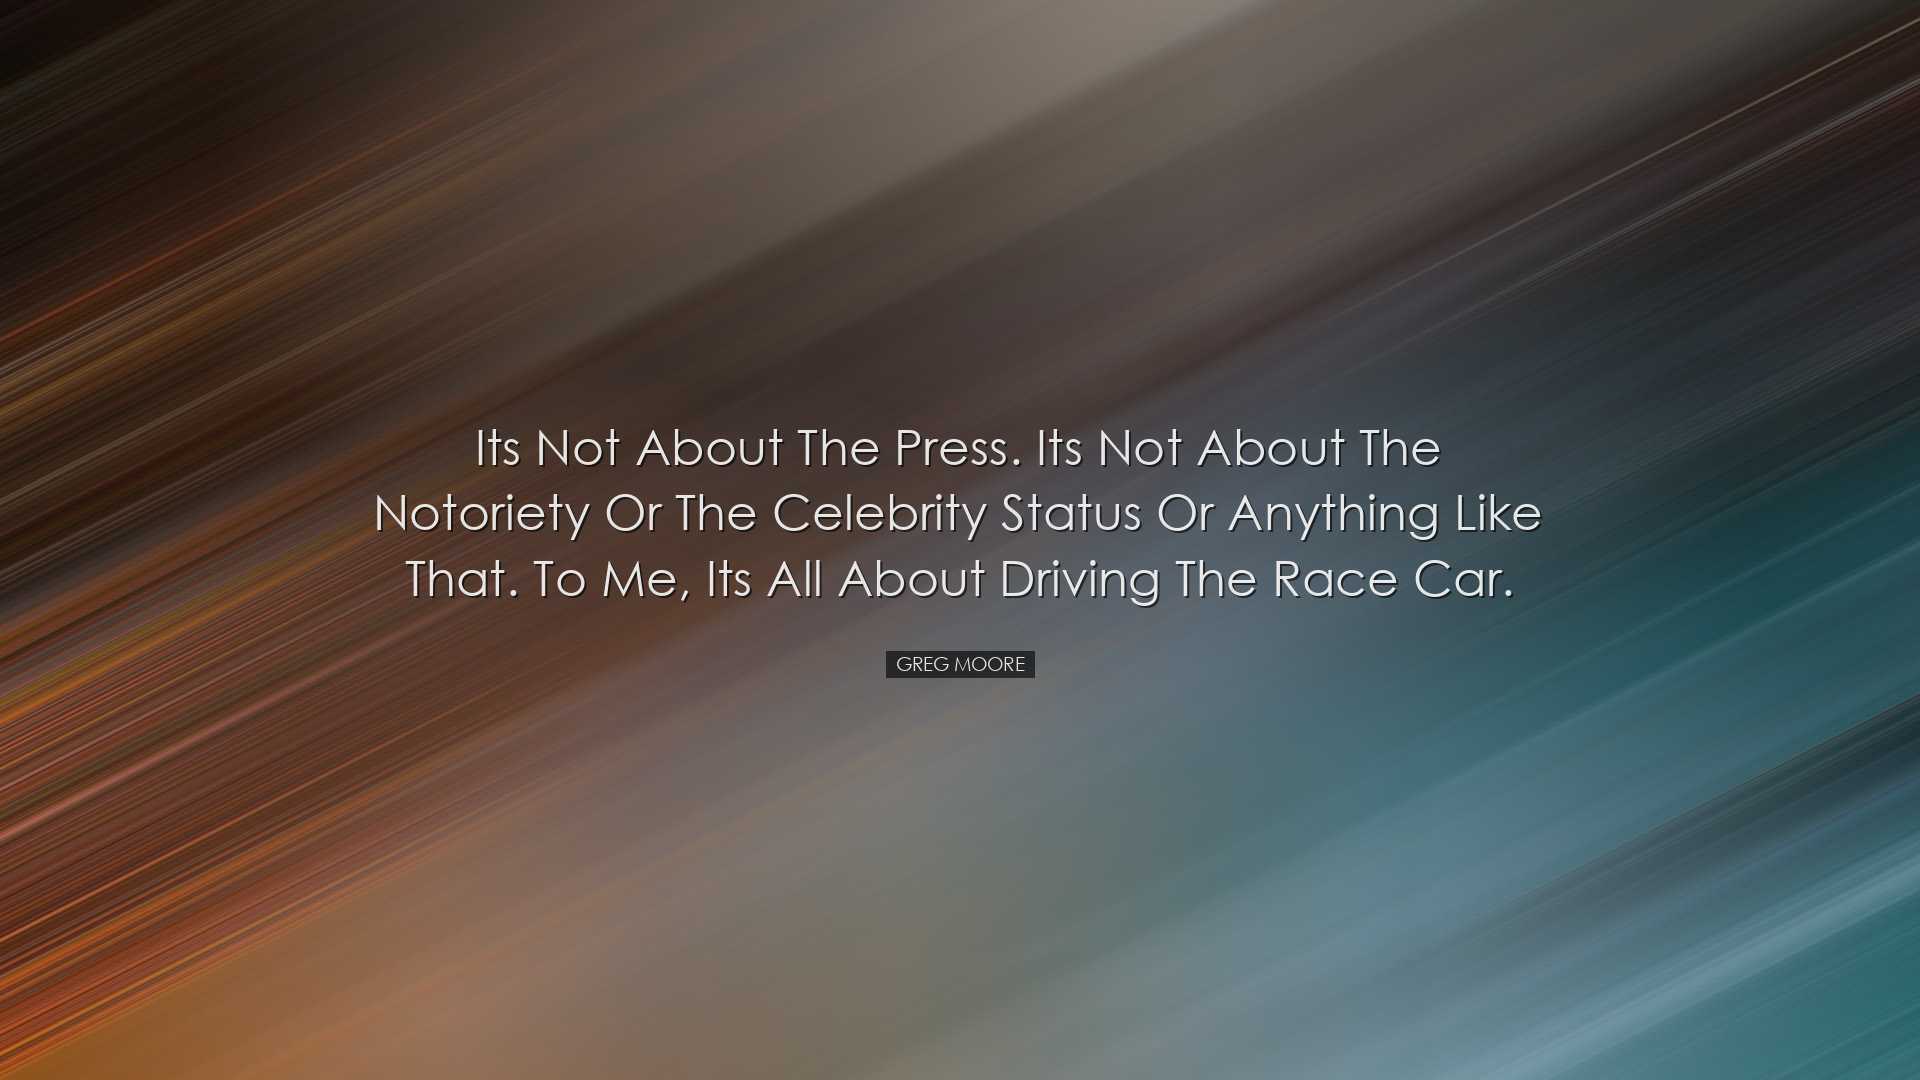 Its not about the press. Its not about the notoriety or the celebr